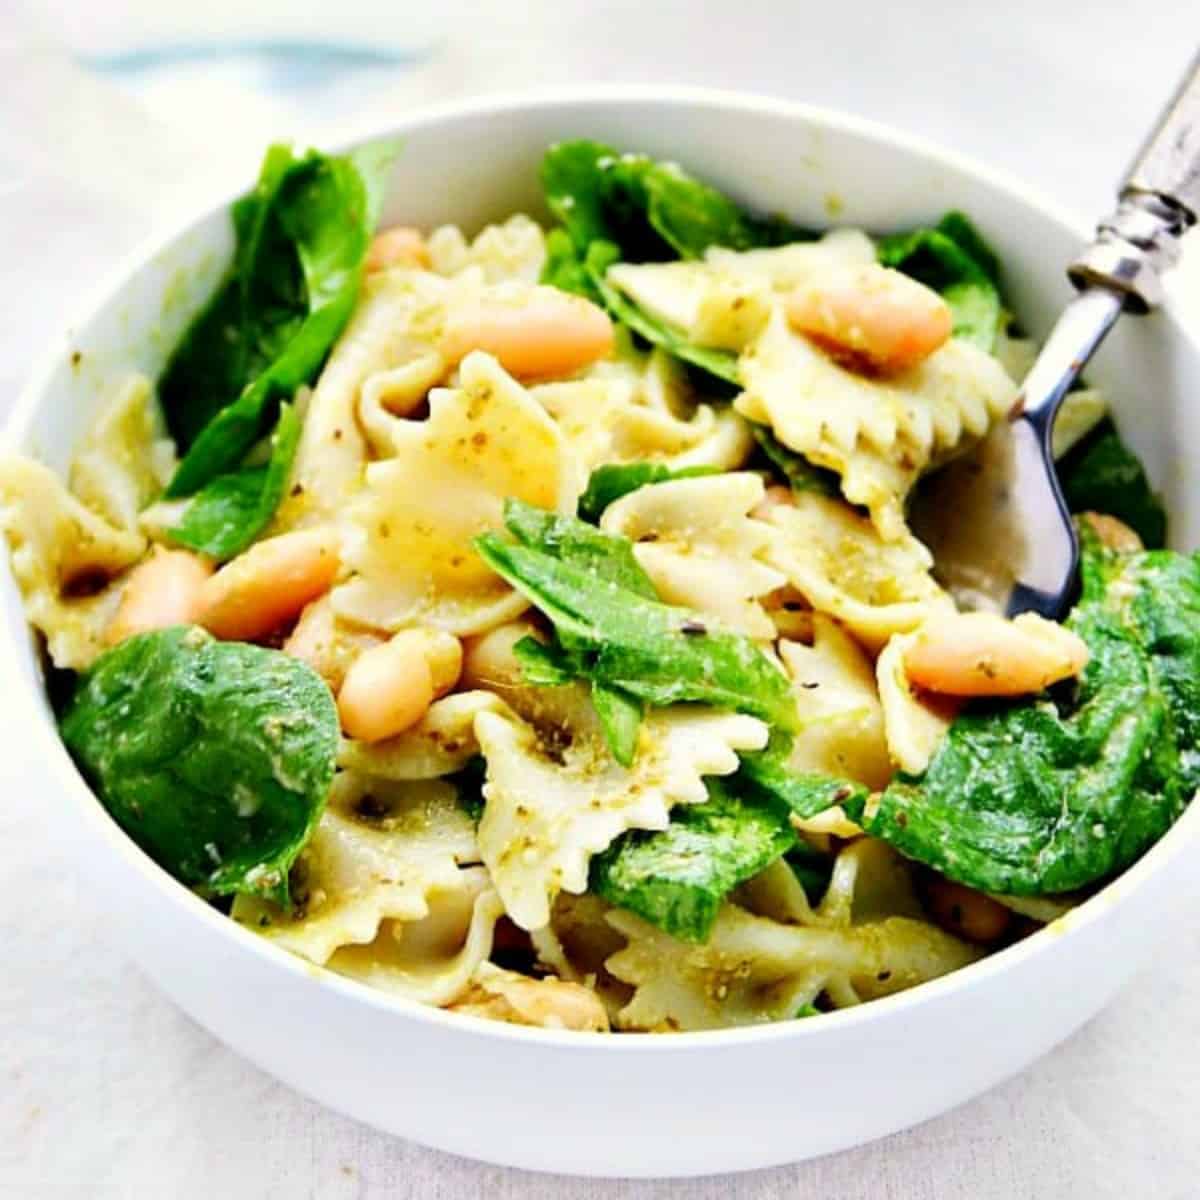 Pasta salad with pesto and spinach in a bowl.